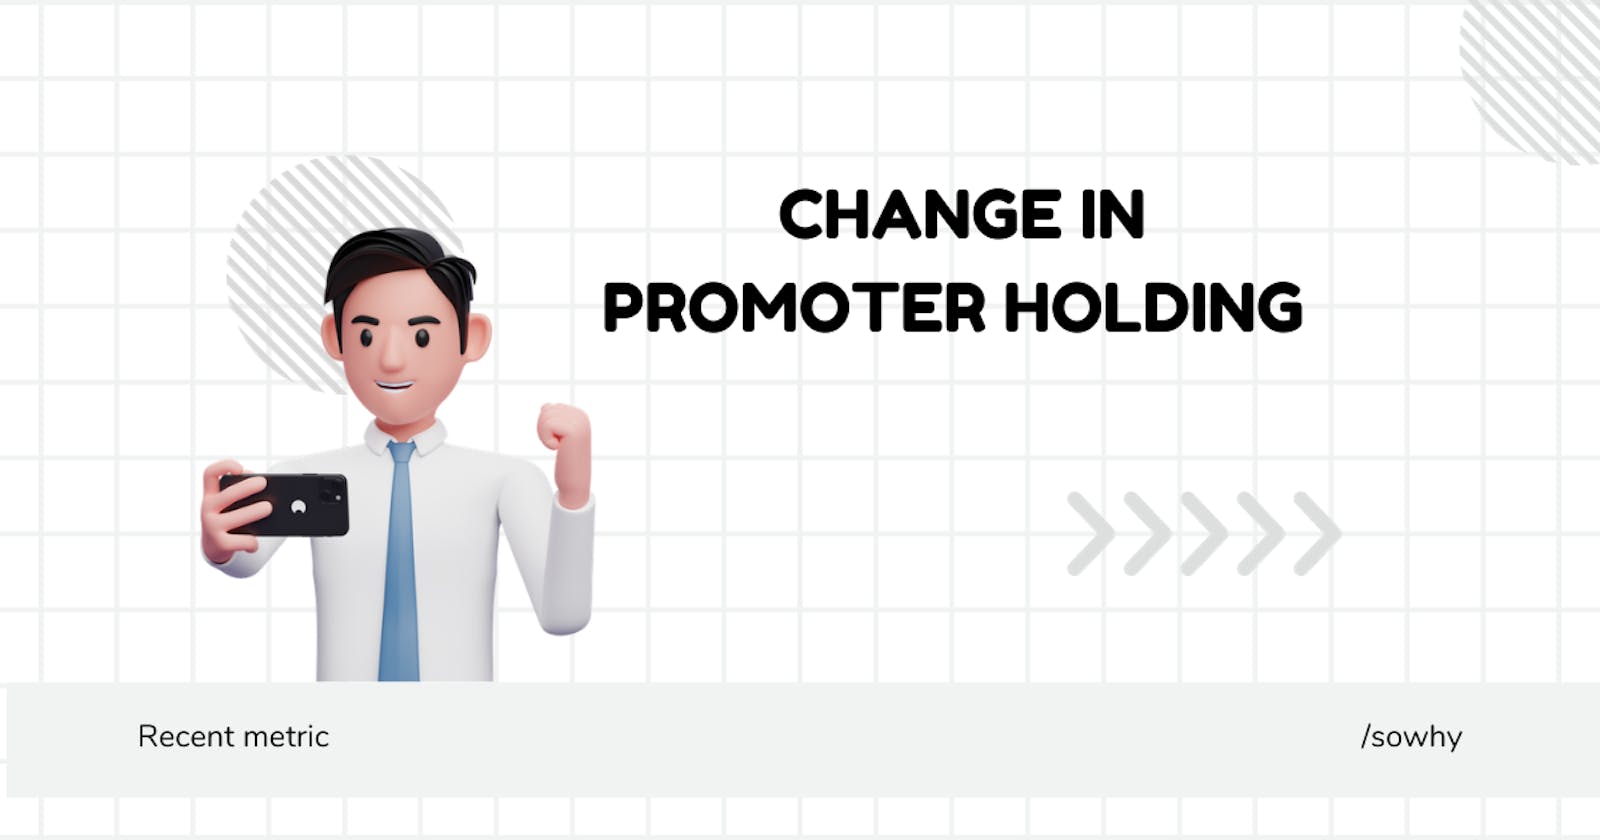 Change in Promoter Holding